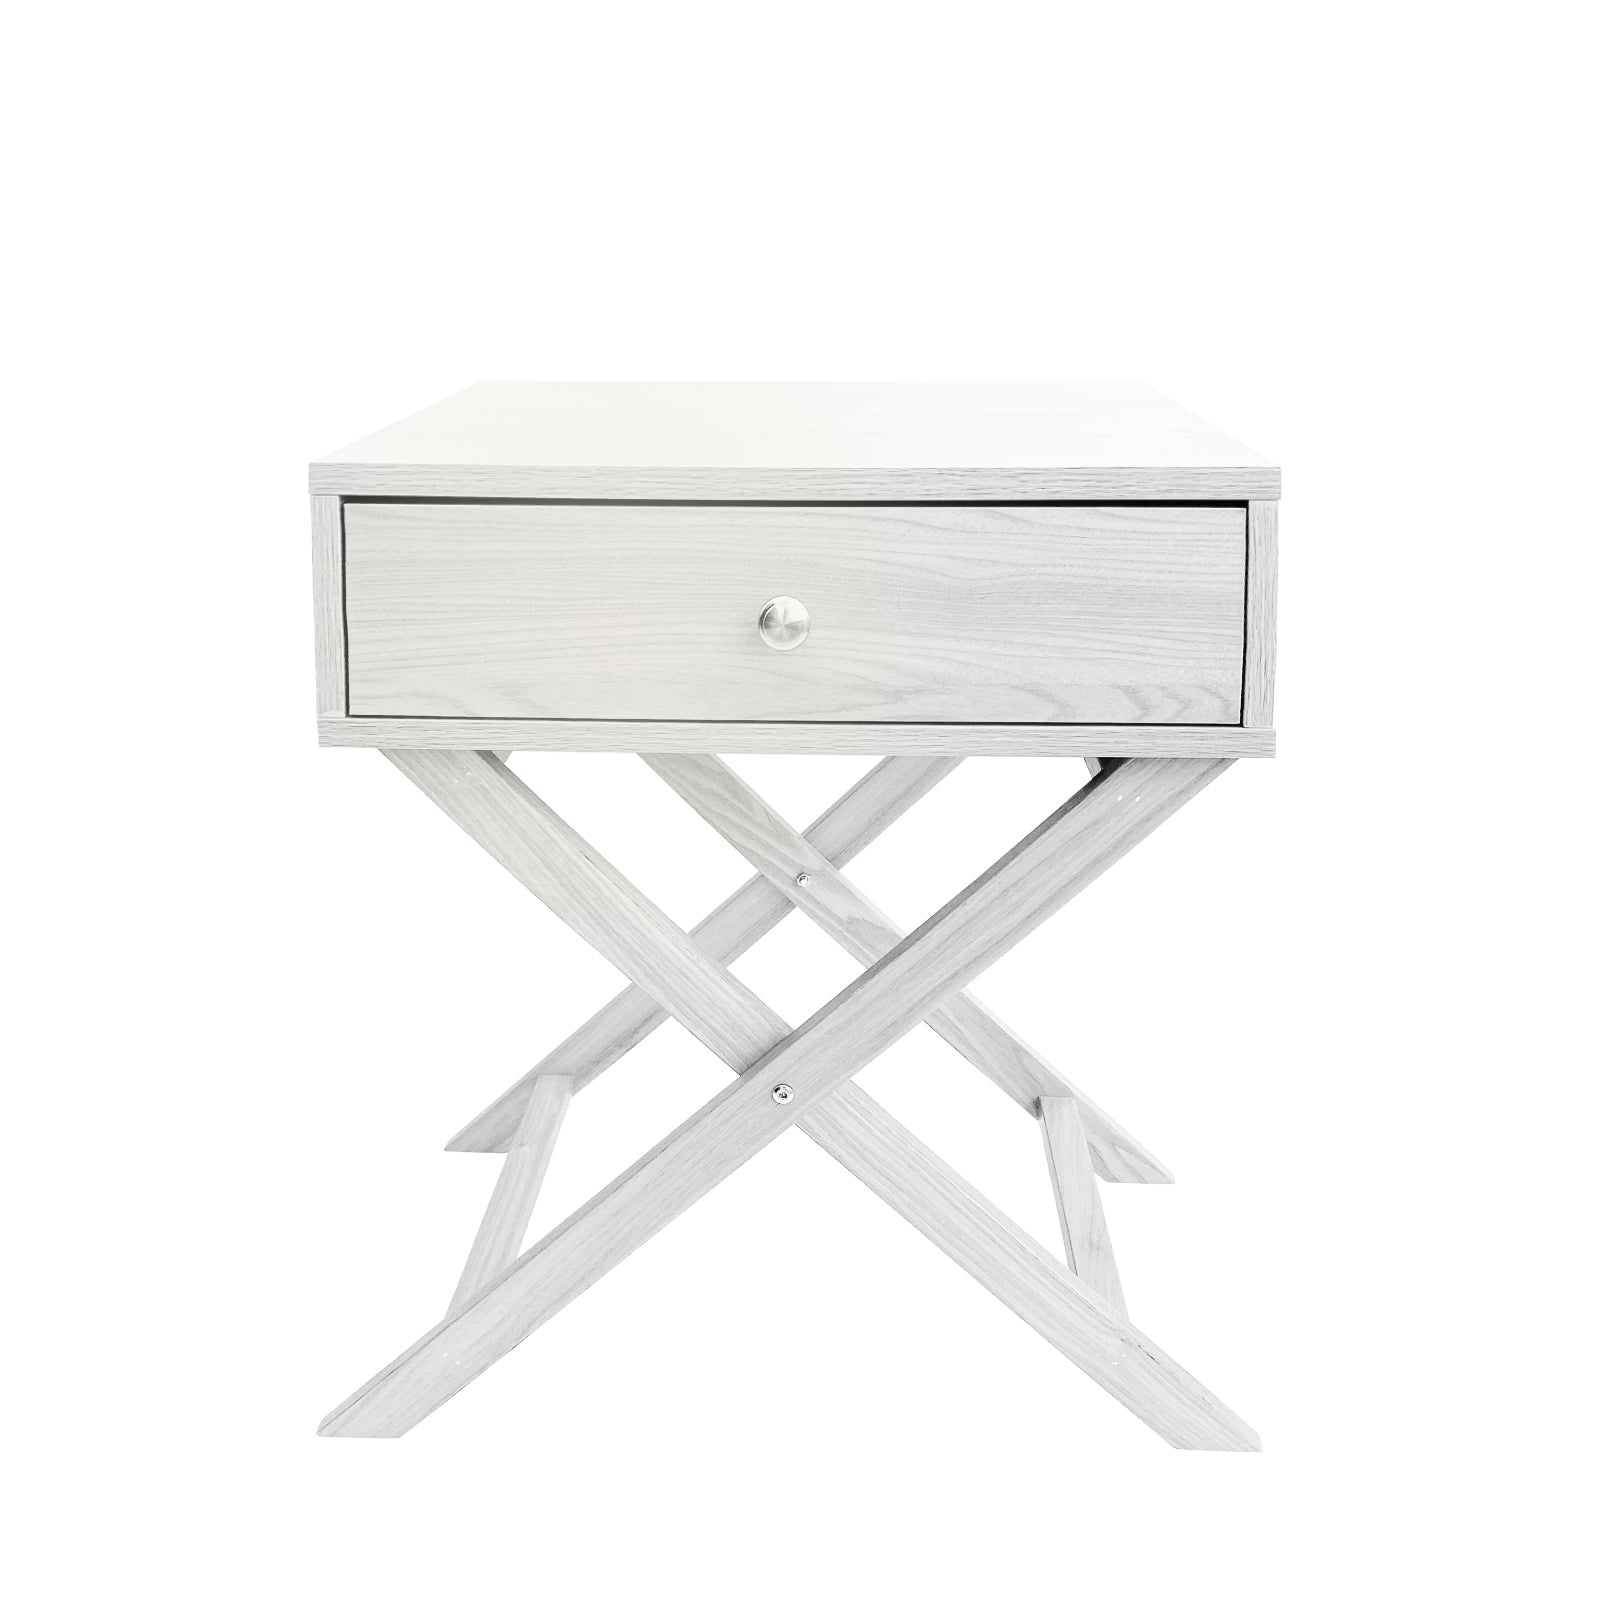 Milano Decor Bedside Table Surry Hills White Storage Cabinet Bedroom - Two Pack - White